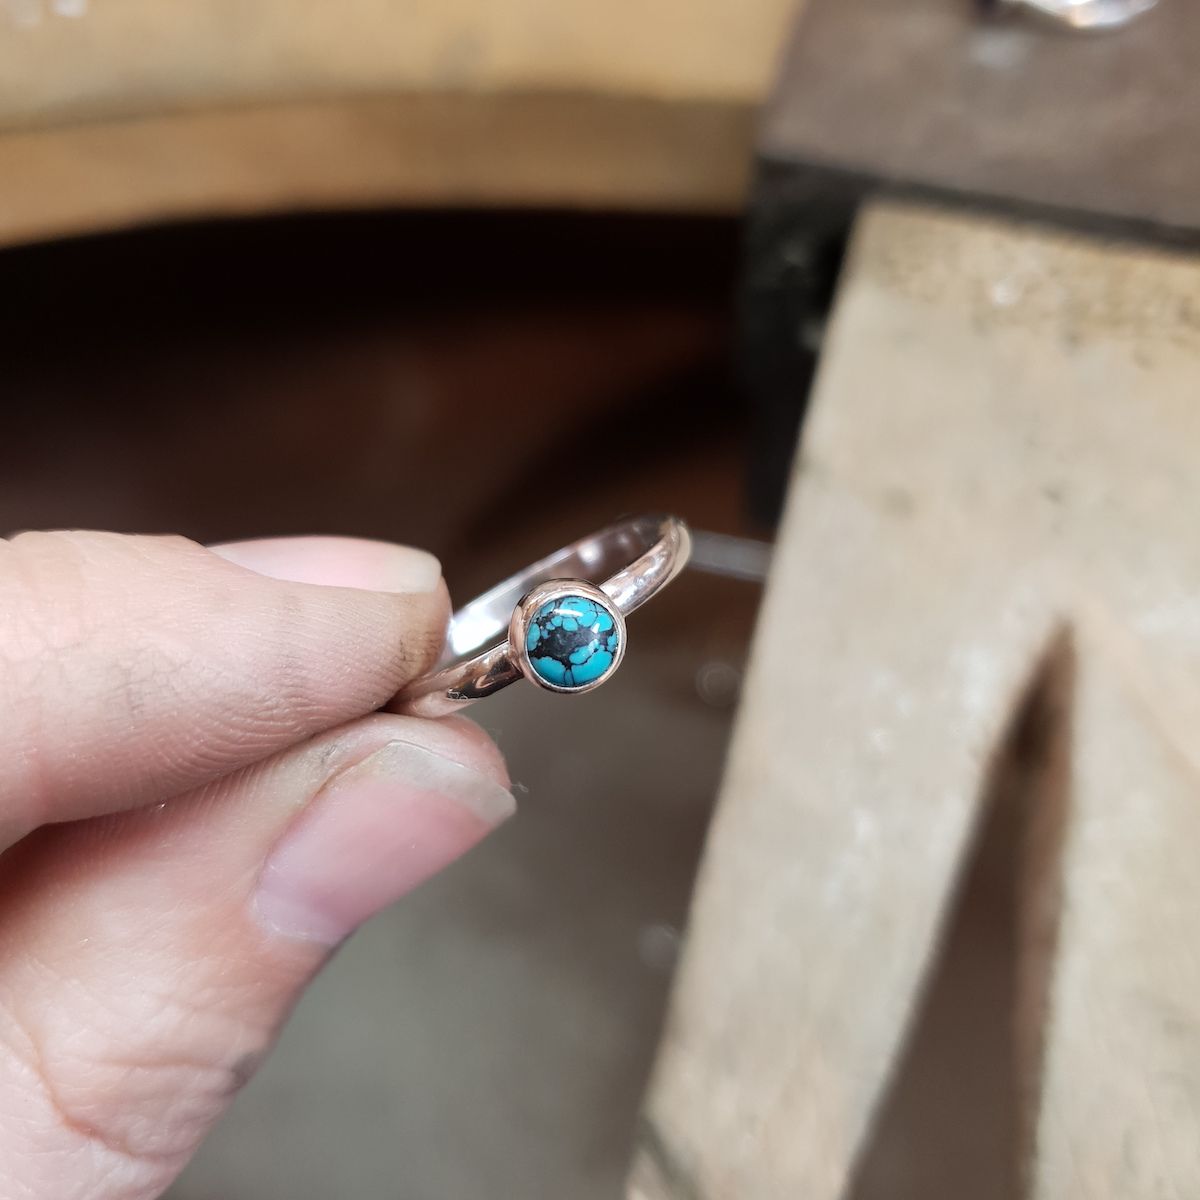 How-to Make a Cabochon Bezel Setting 